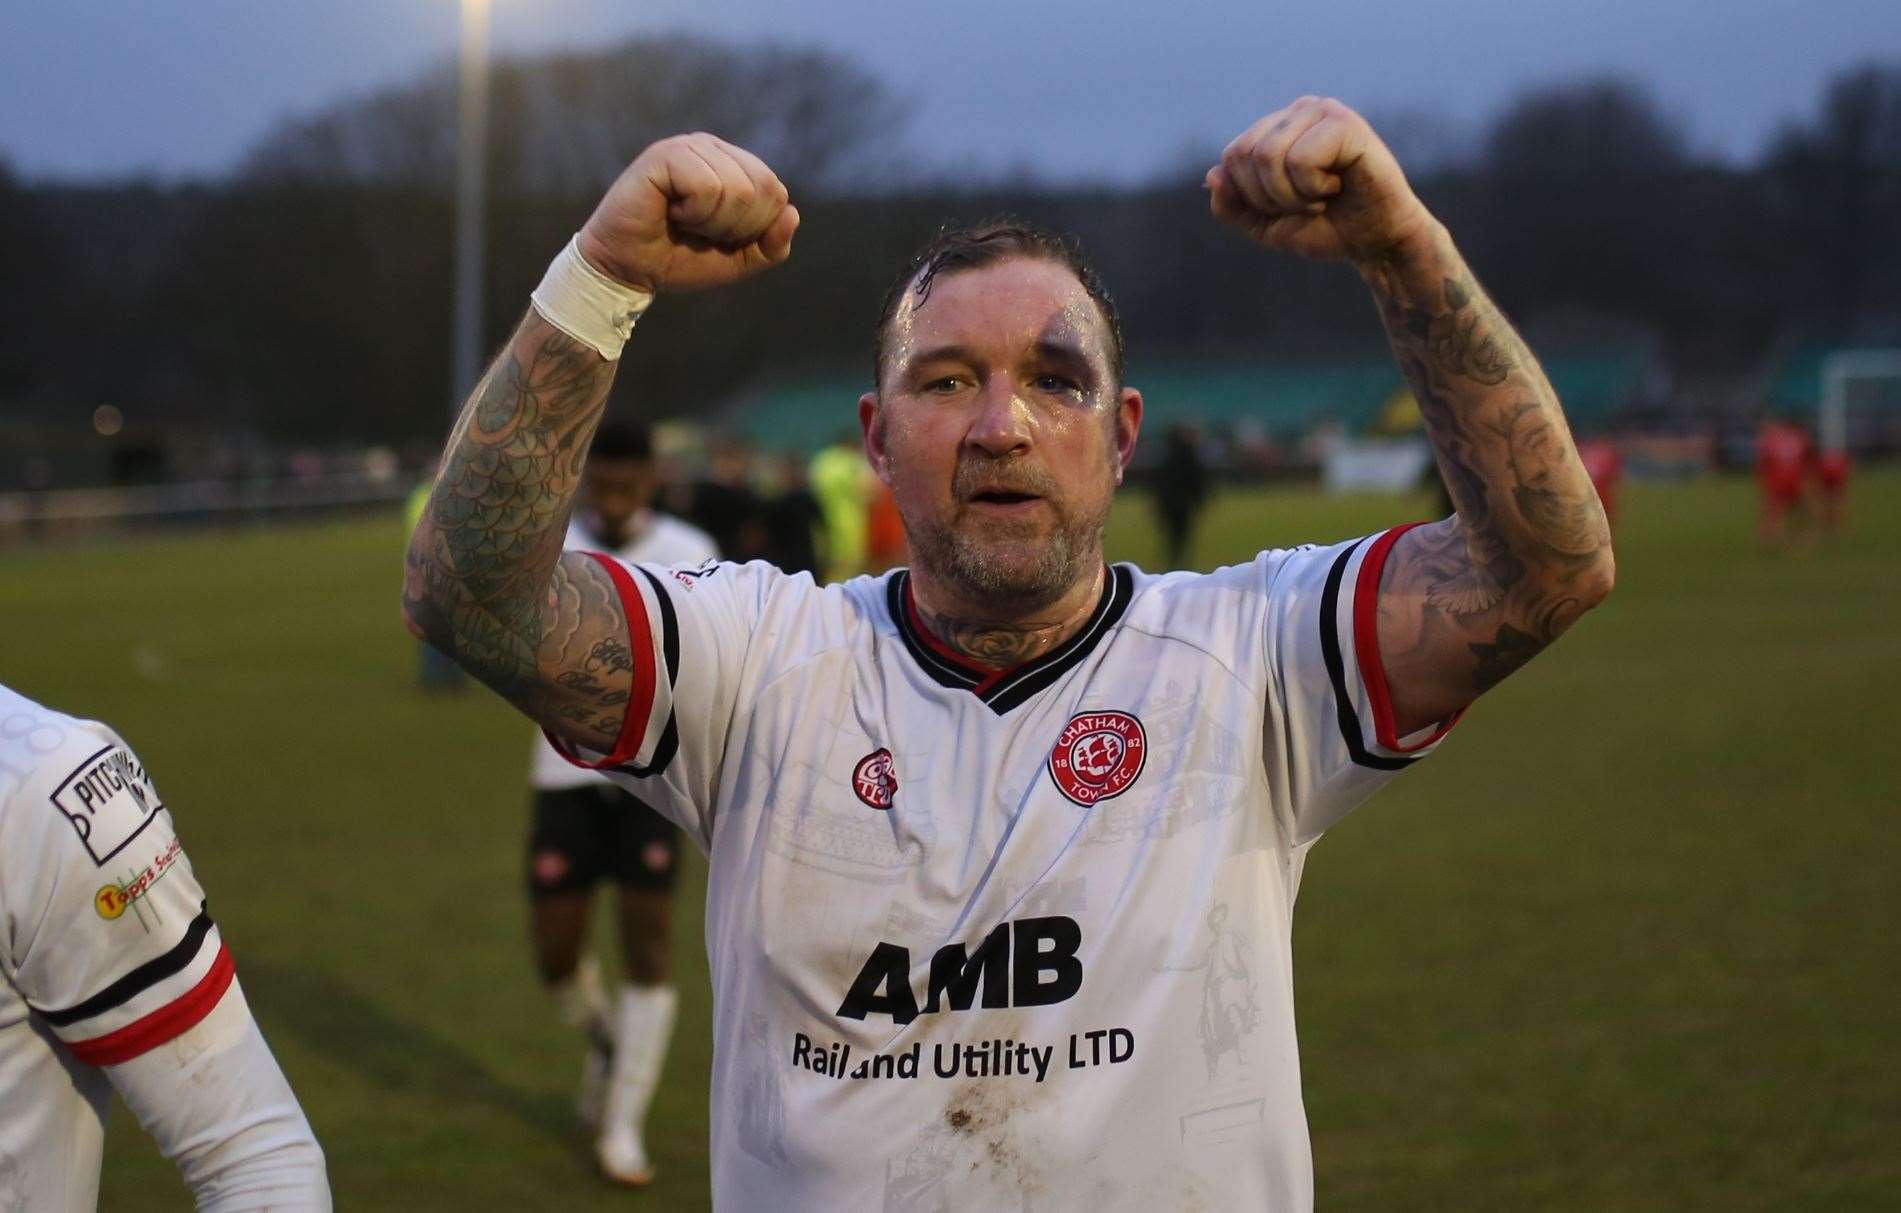 Matchwinner Danny Kedwell celebrates after Chats beat Whitehawk Picture: Max English (@max_ePhotos)